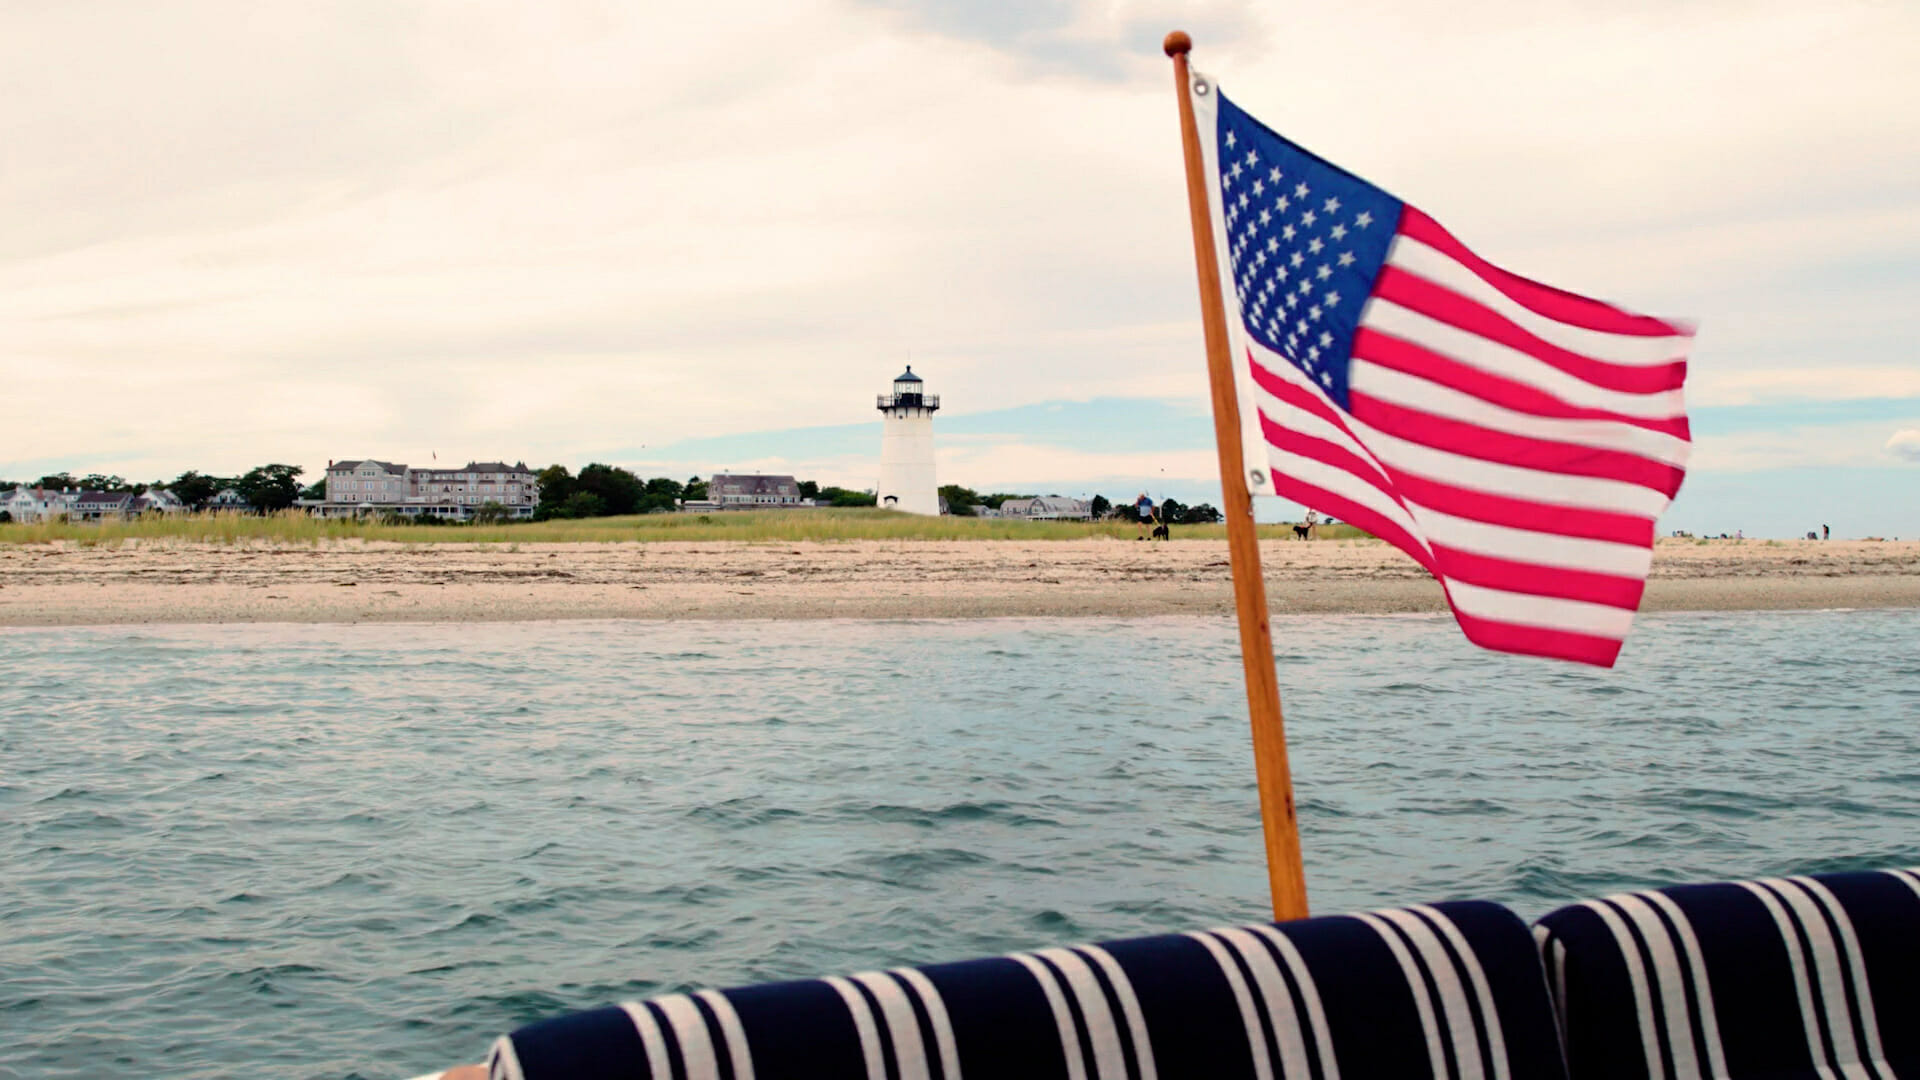 American flag in the foreground of blue-grey water surrounding an island with a lighthouse